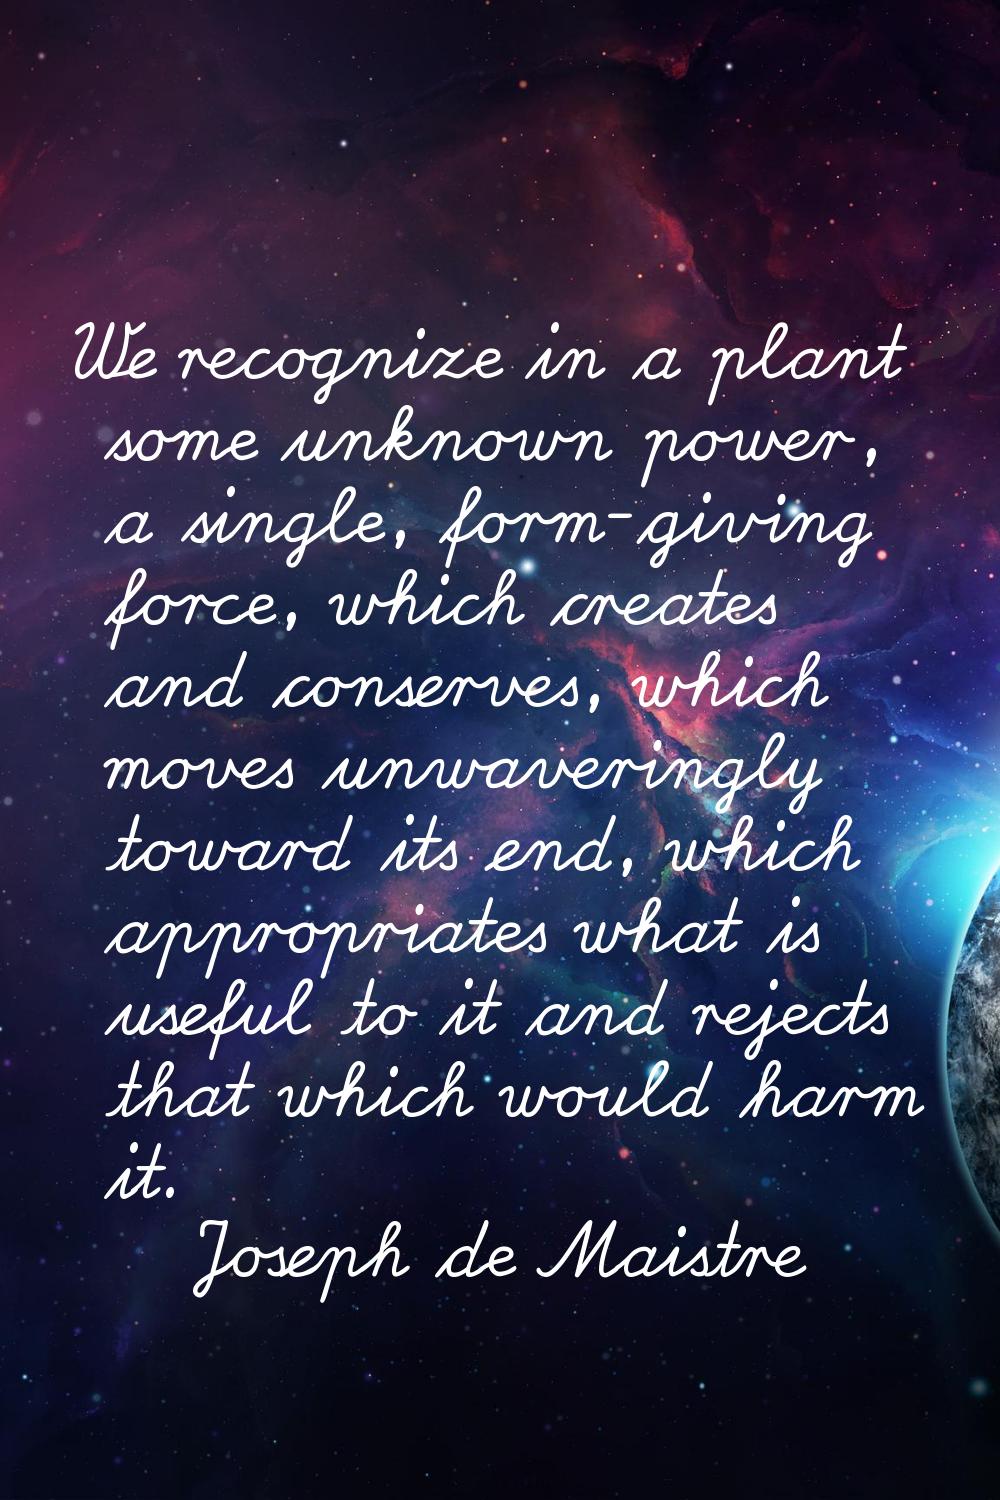 We recognize in a plant some unknown power, a single, form-giving force, which creates and conserve